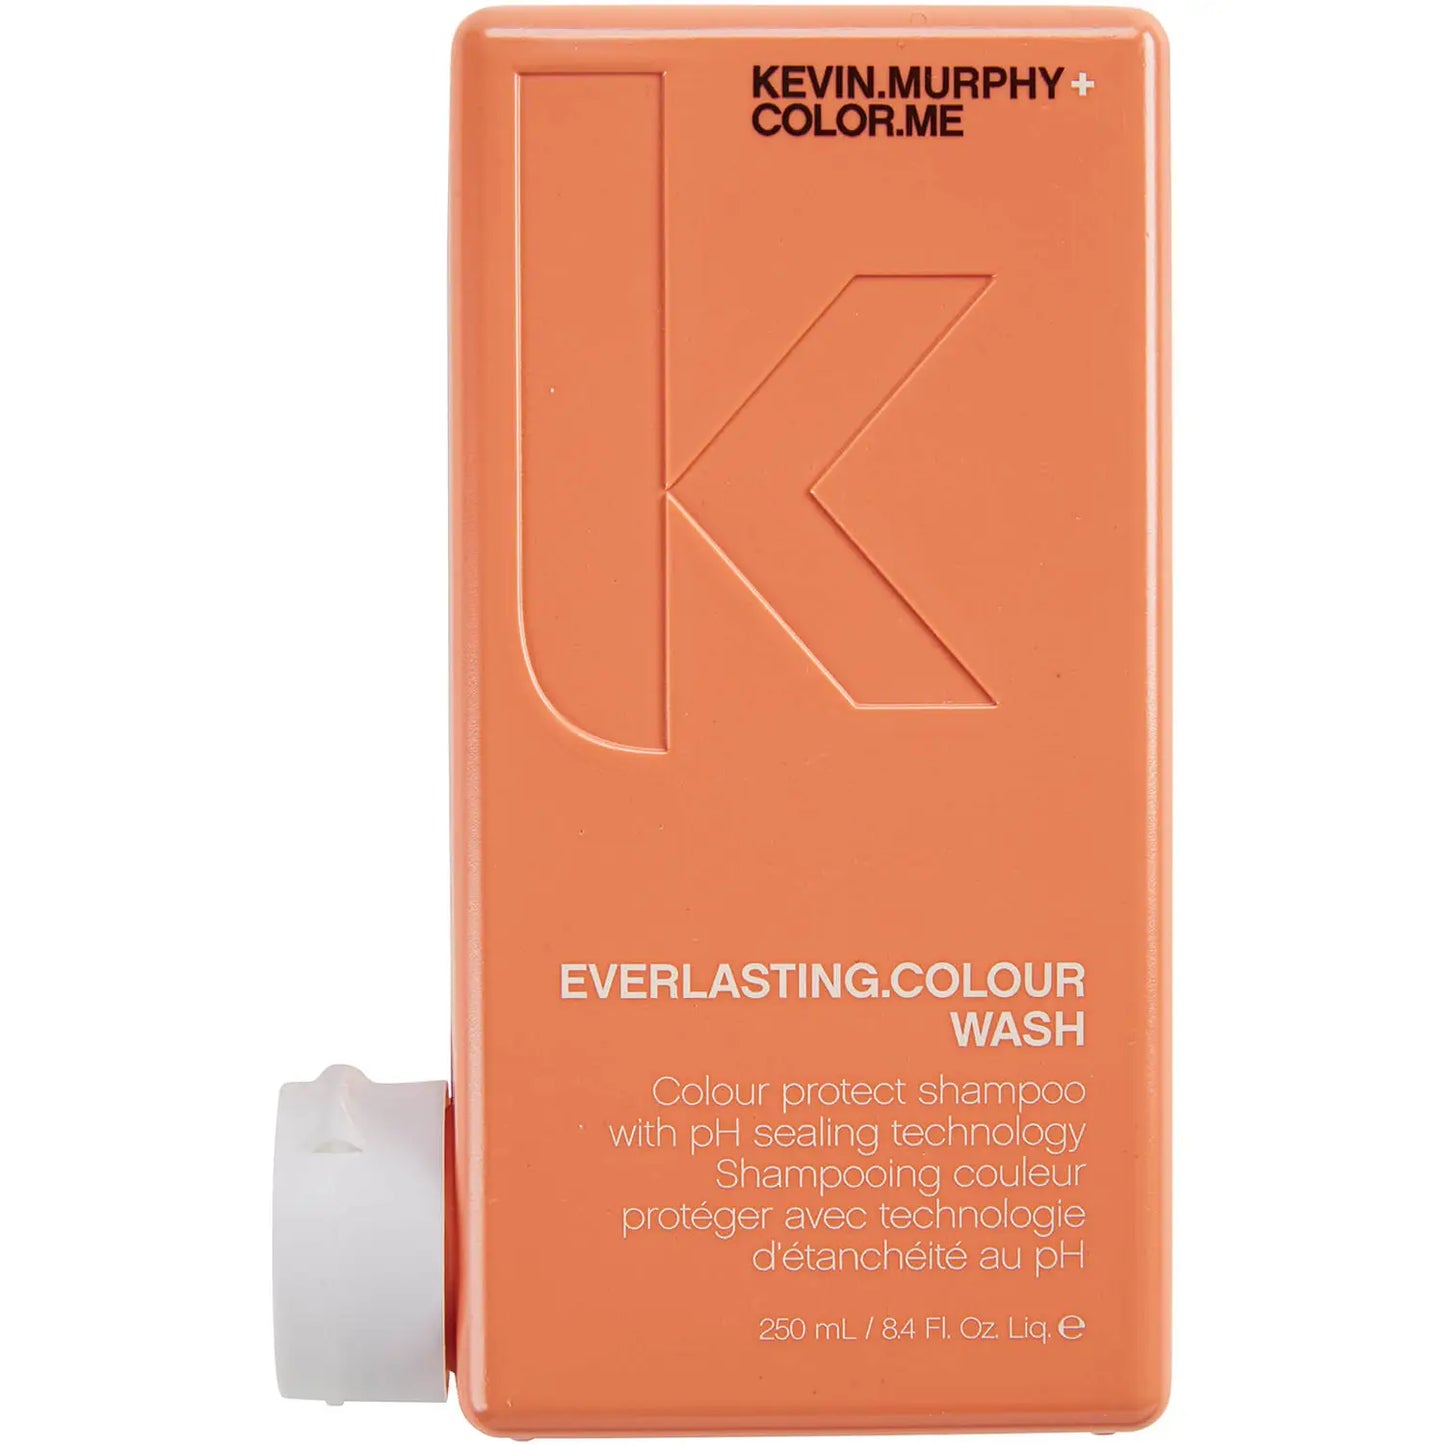 KEVIN MURPHY | EVERLASTING.COLOUR WASH